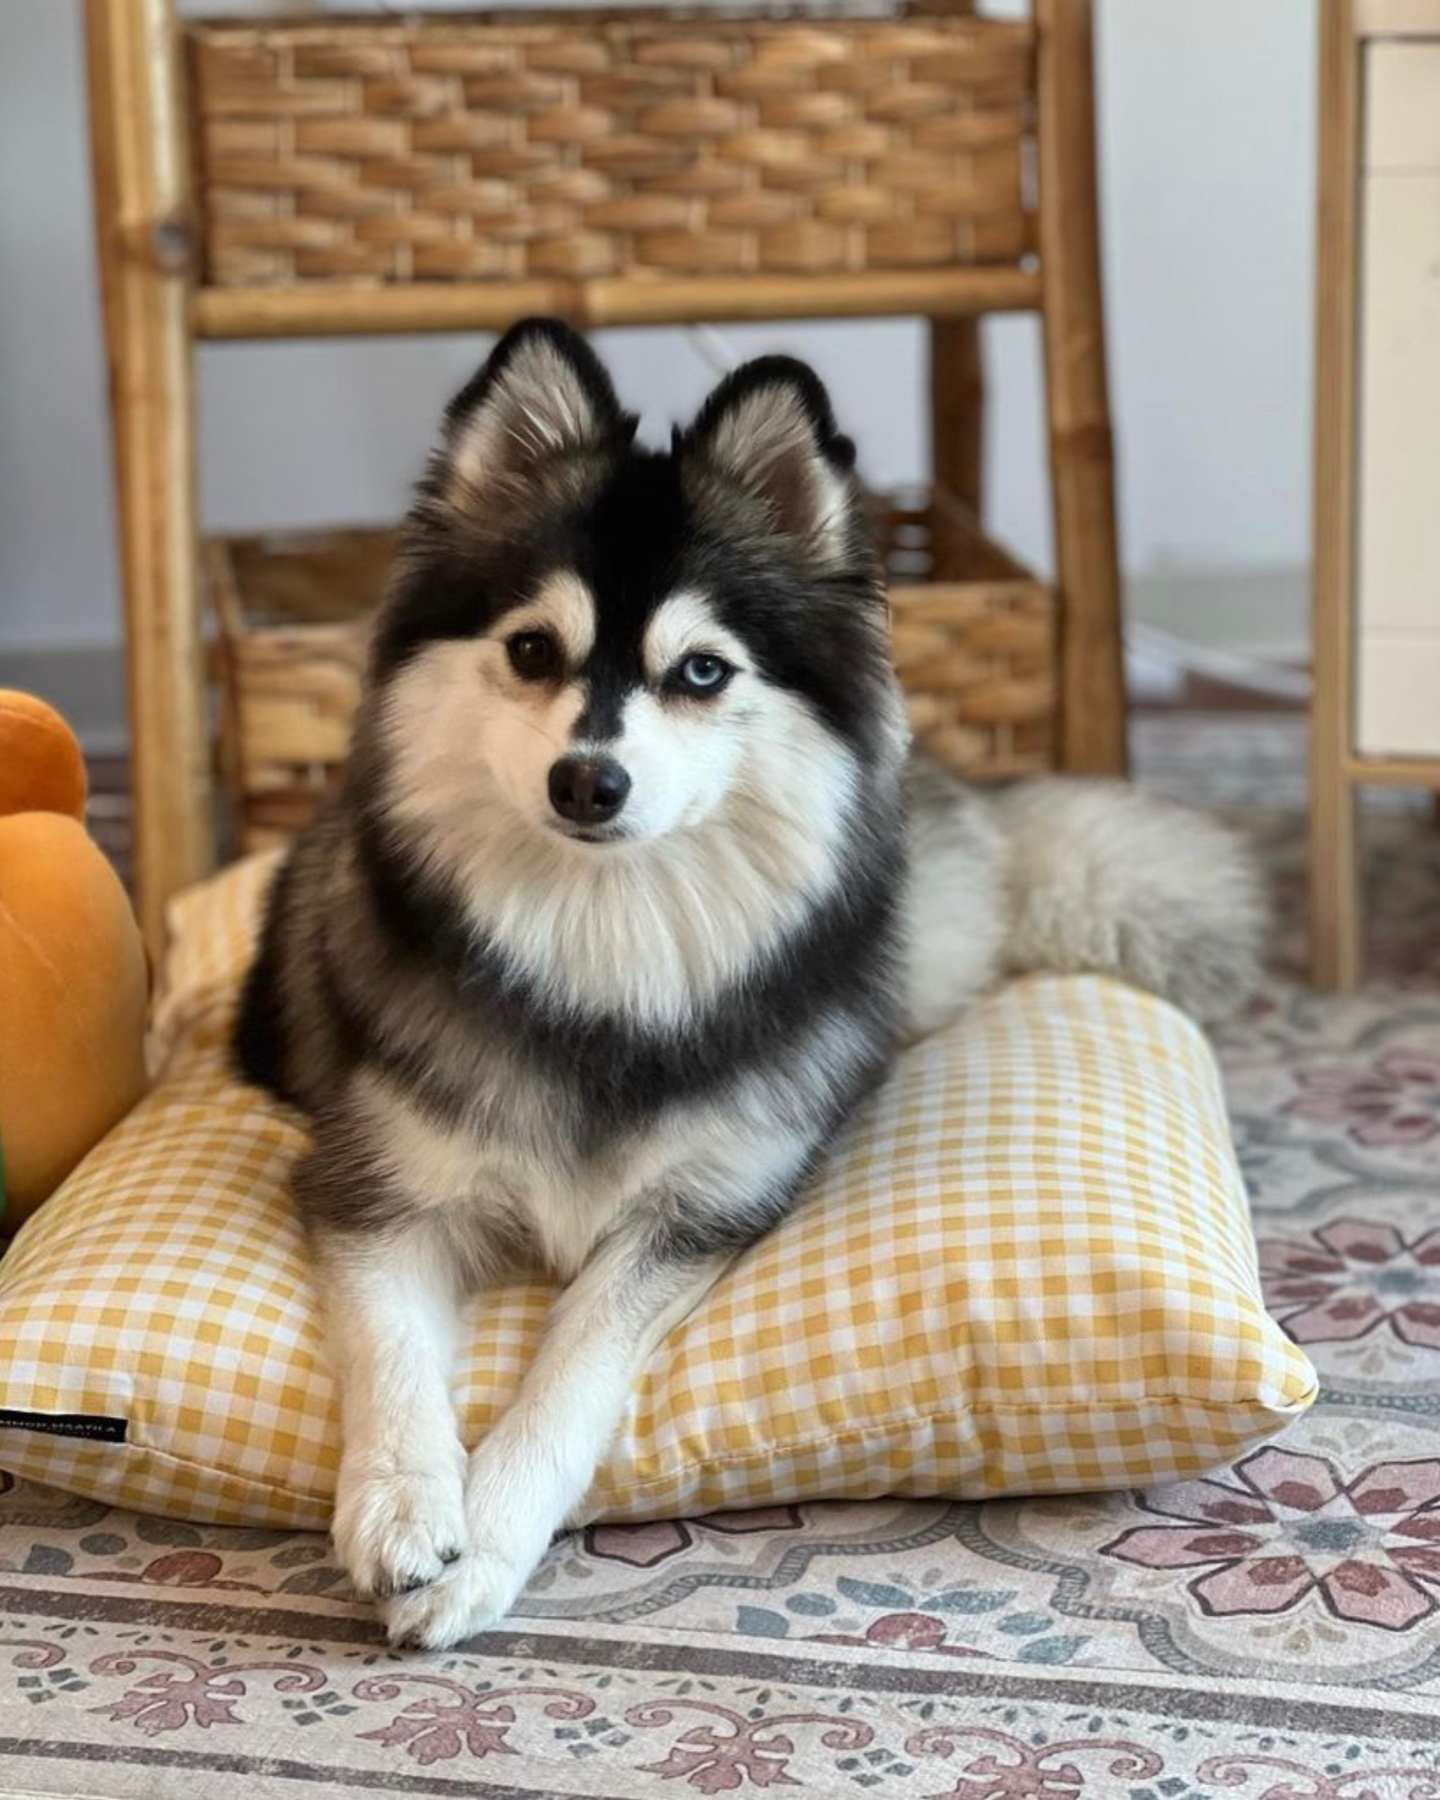 An adorable dog sitting on a pillow